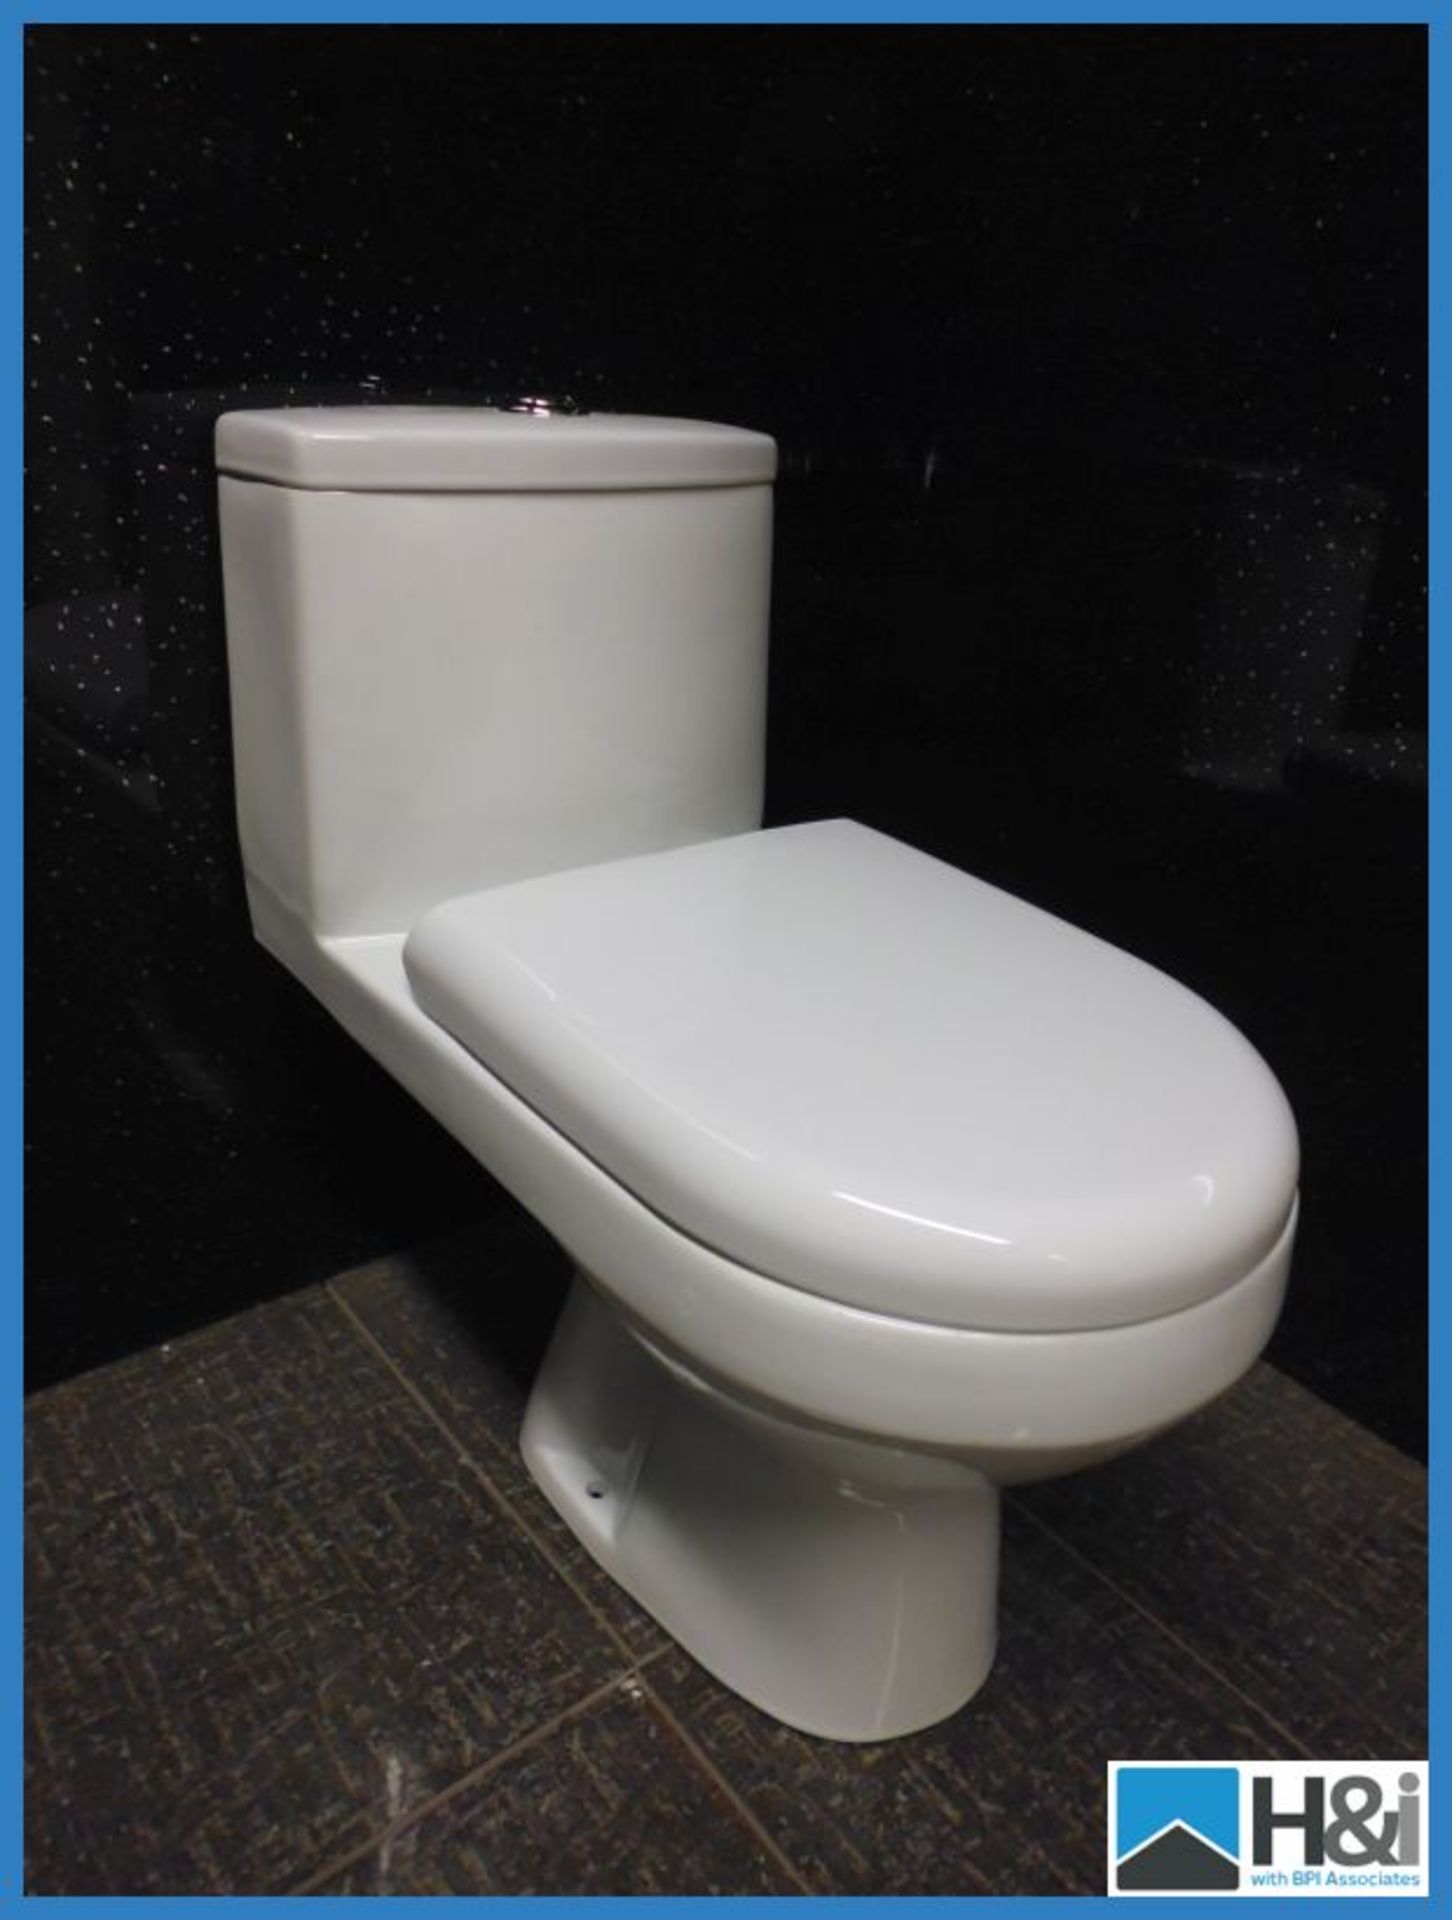 Stunning Cavalier One Piece Ceramic WC with Built in Cistern and Soft Close Seat. Typical RRP 399